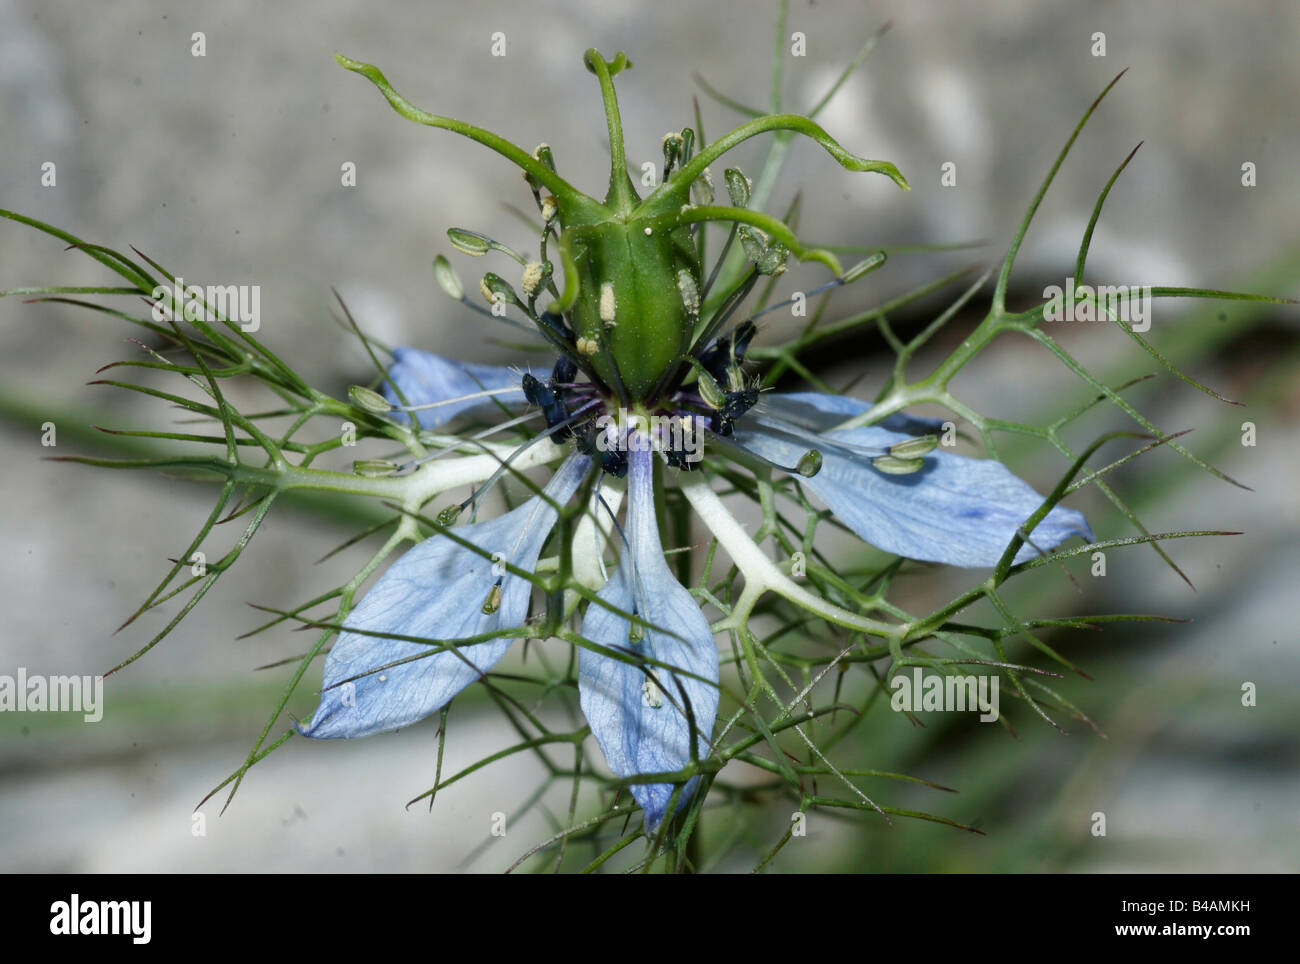 botany, buttercup family (Ranunculaceae), 'Love-in-a-mist' (Nigella damascena), bloom, Additional-Rights-Clearance-Info-Not-Available Stock Photo